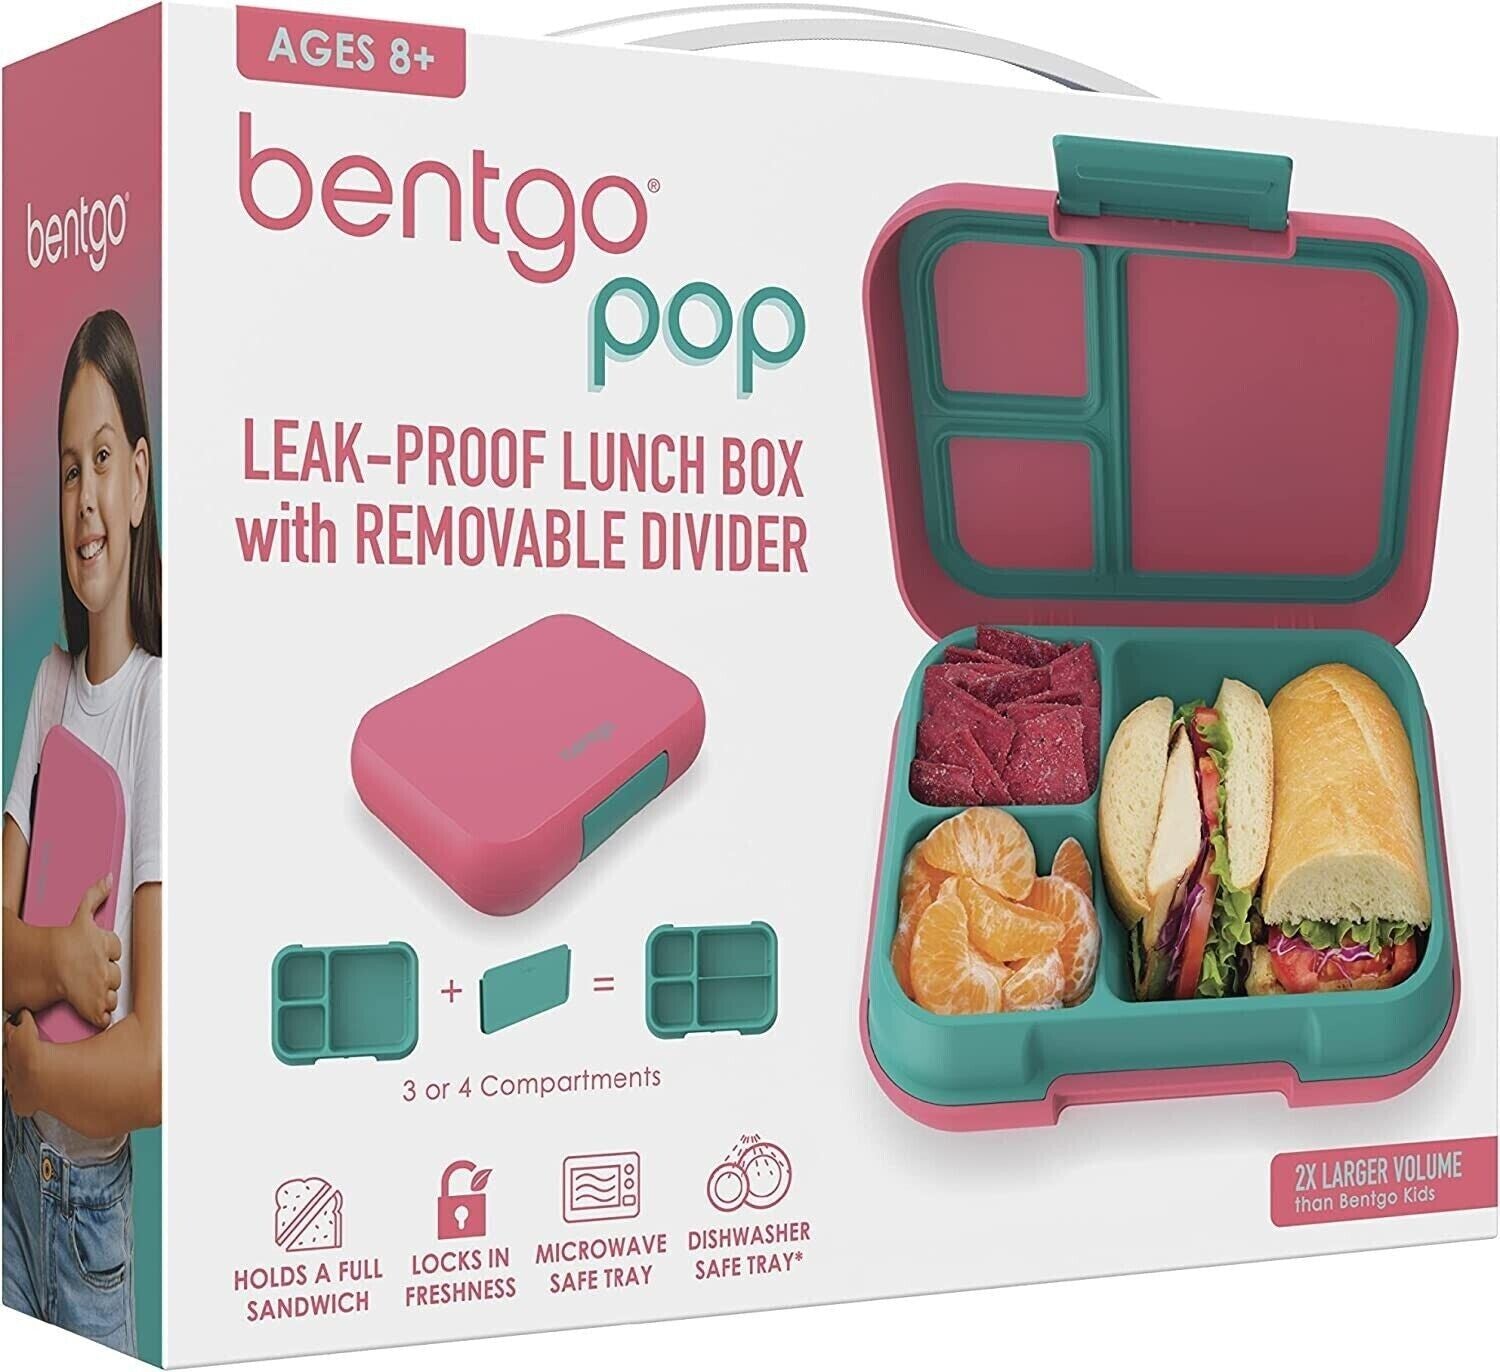 Bentgo Pop Leak-Proof Bento-Style Lunch Box Removable Divider-3.4 Cup